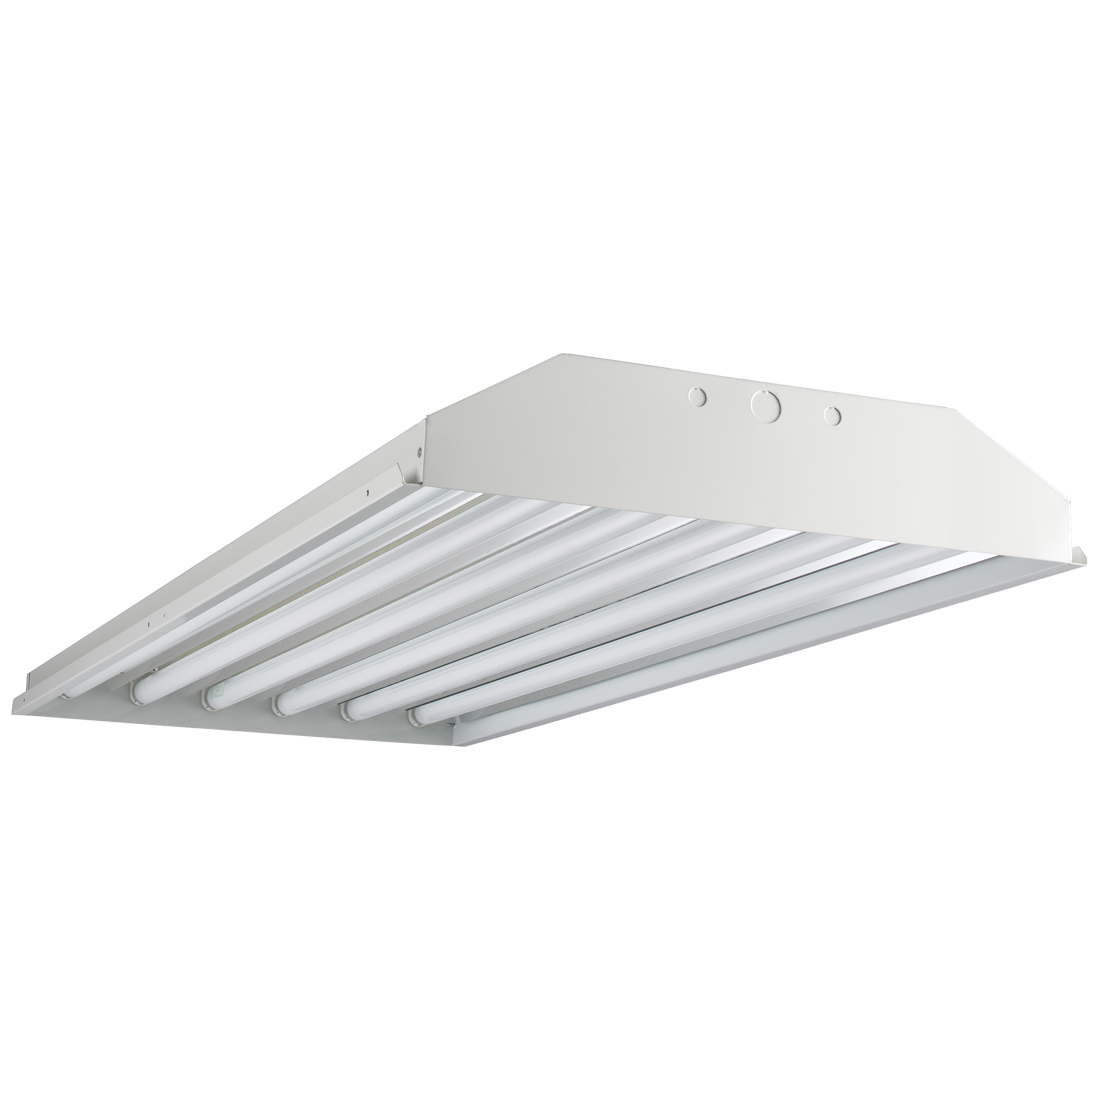 Atlas® Vigilant® IFS4654UEP5 Full Bodied High Bay Industrial Light Fixture, (6) Fluorescent/T5SHO Lamp, 120 to 277 VAC, Post Painted Polyester Coated Housing